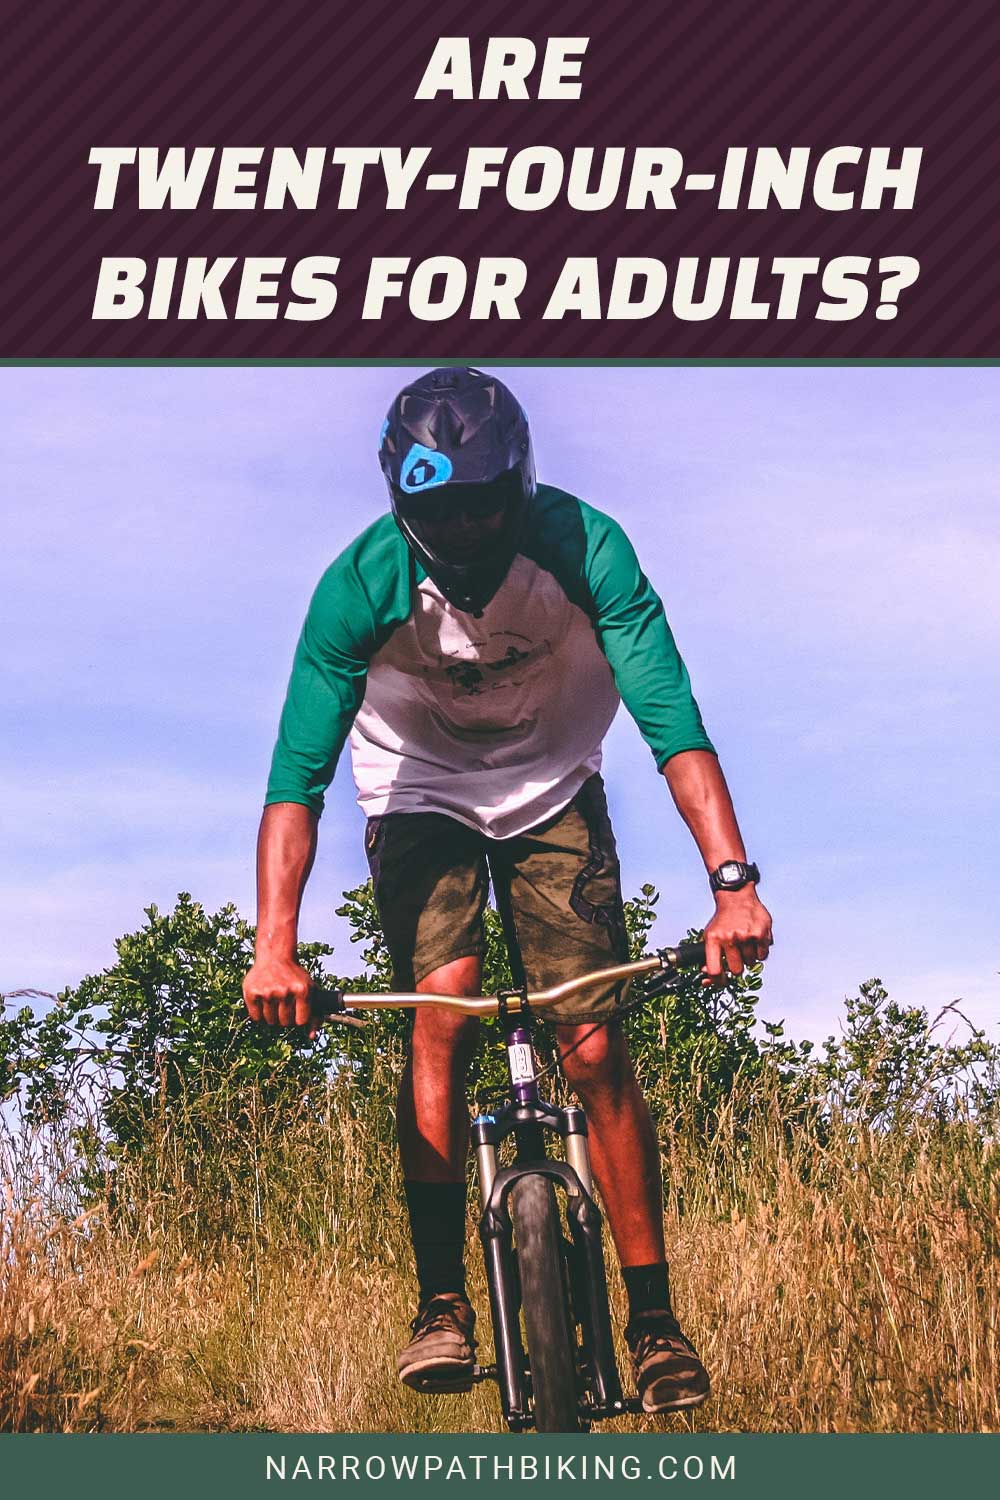 Are Twenty-Four-Inch Bikes For Adults?